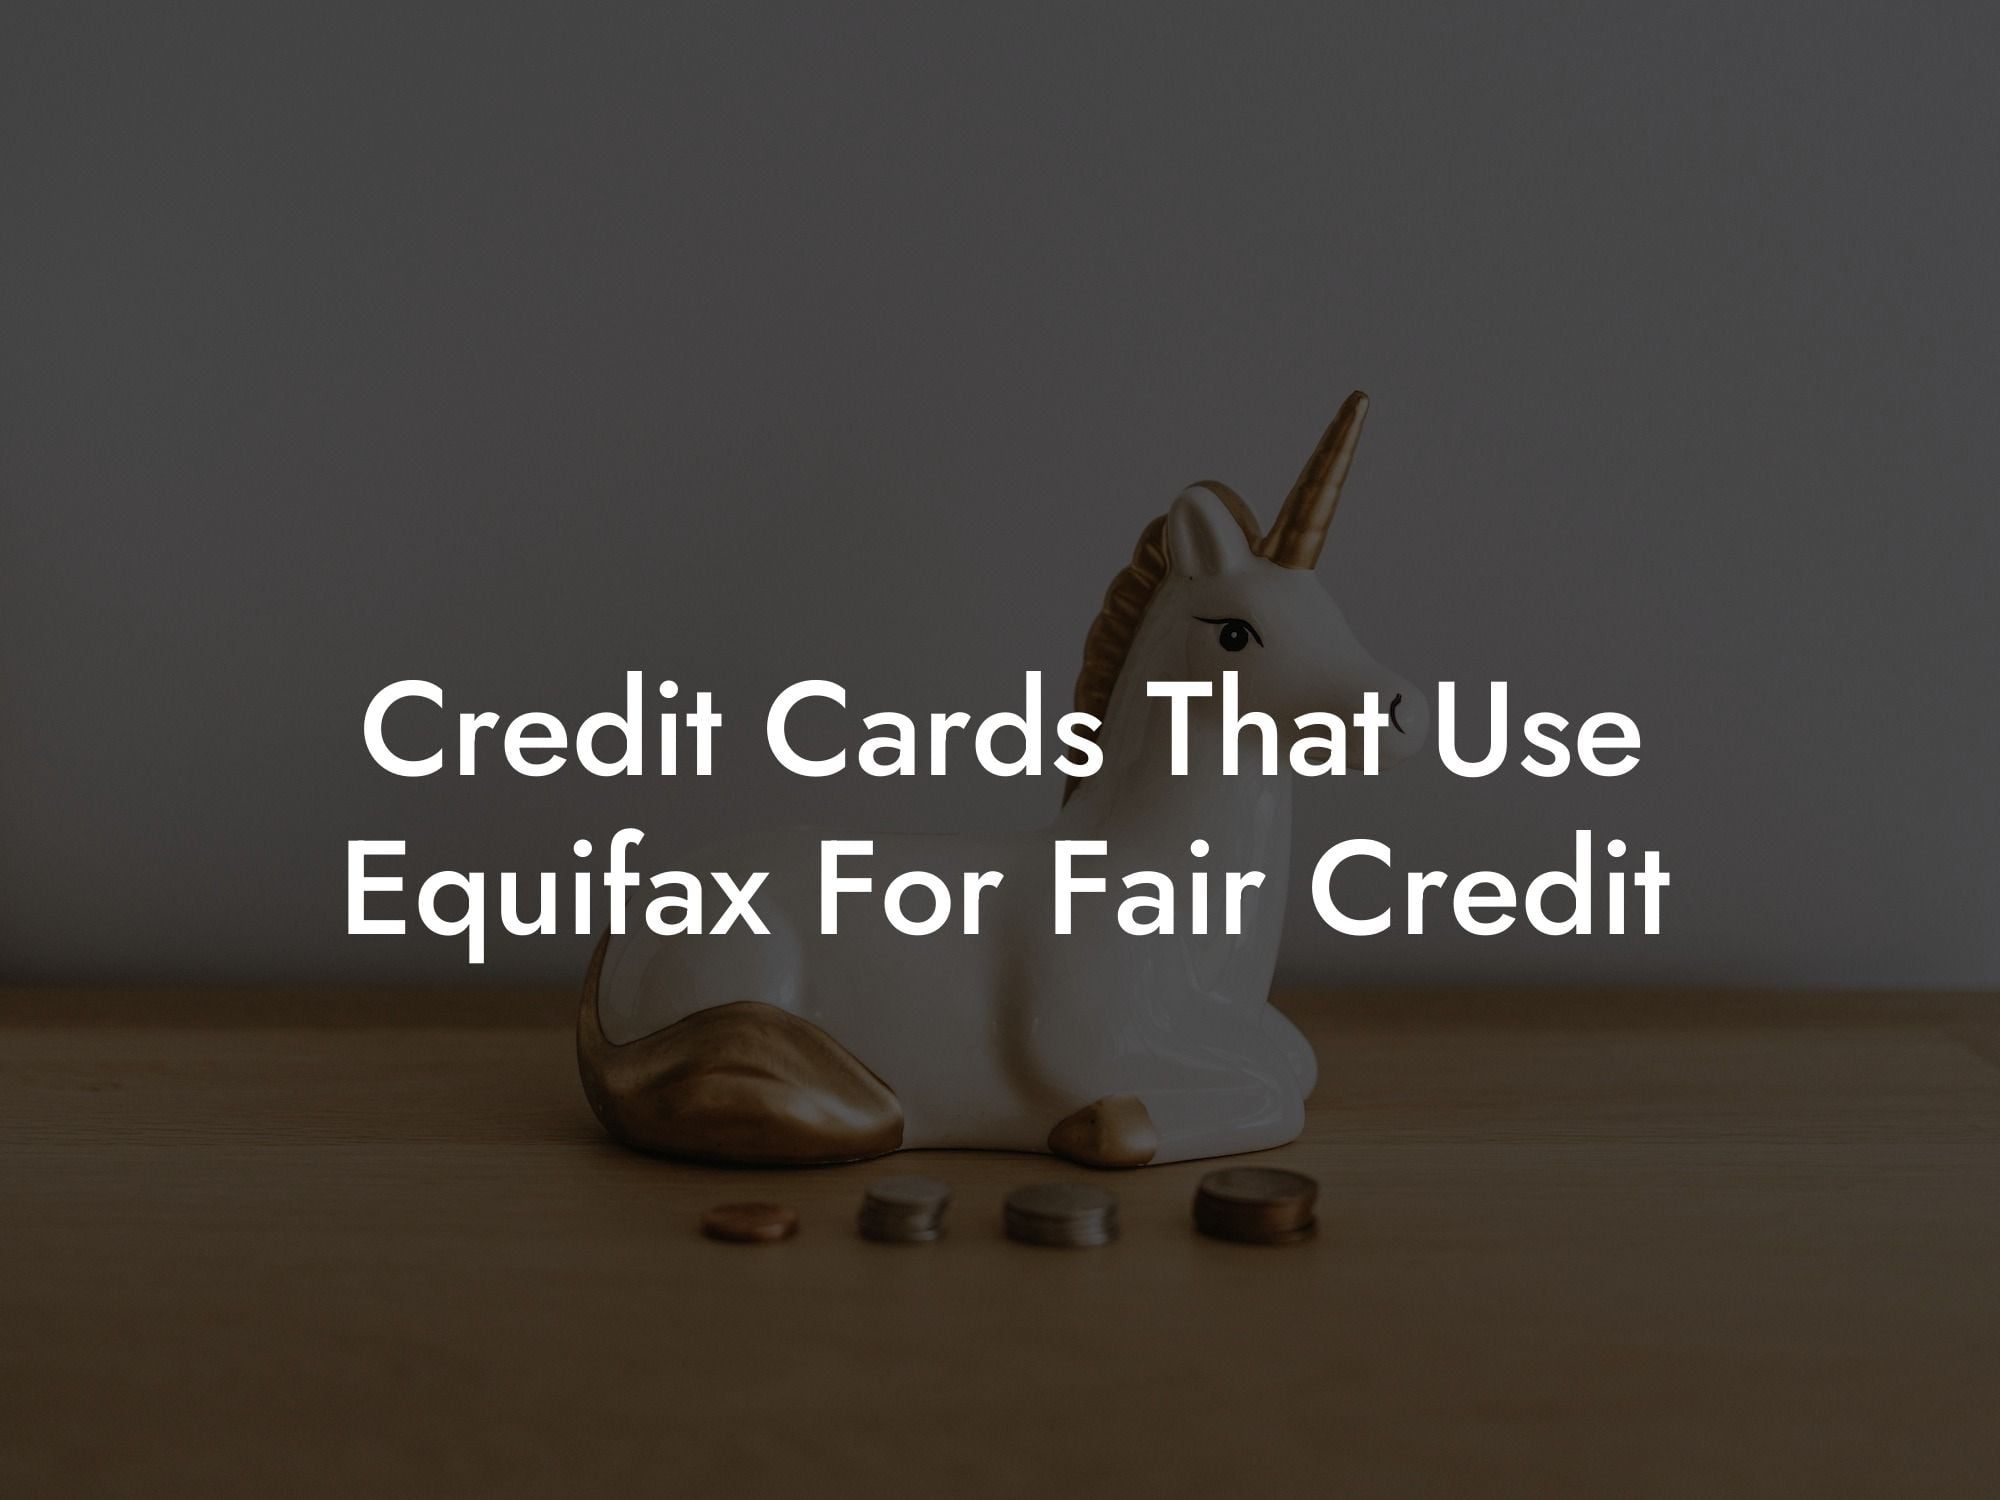 Credit Cards That Use Equifax For Fair Credit